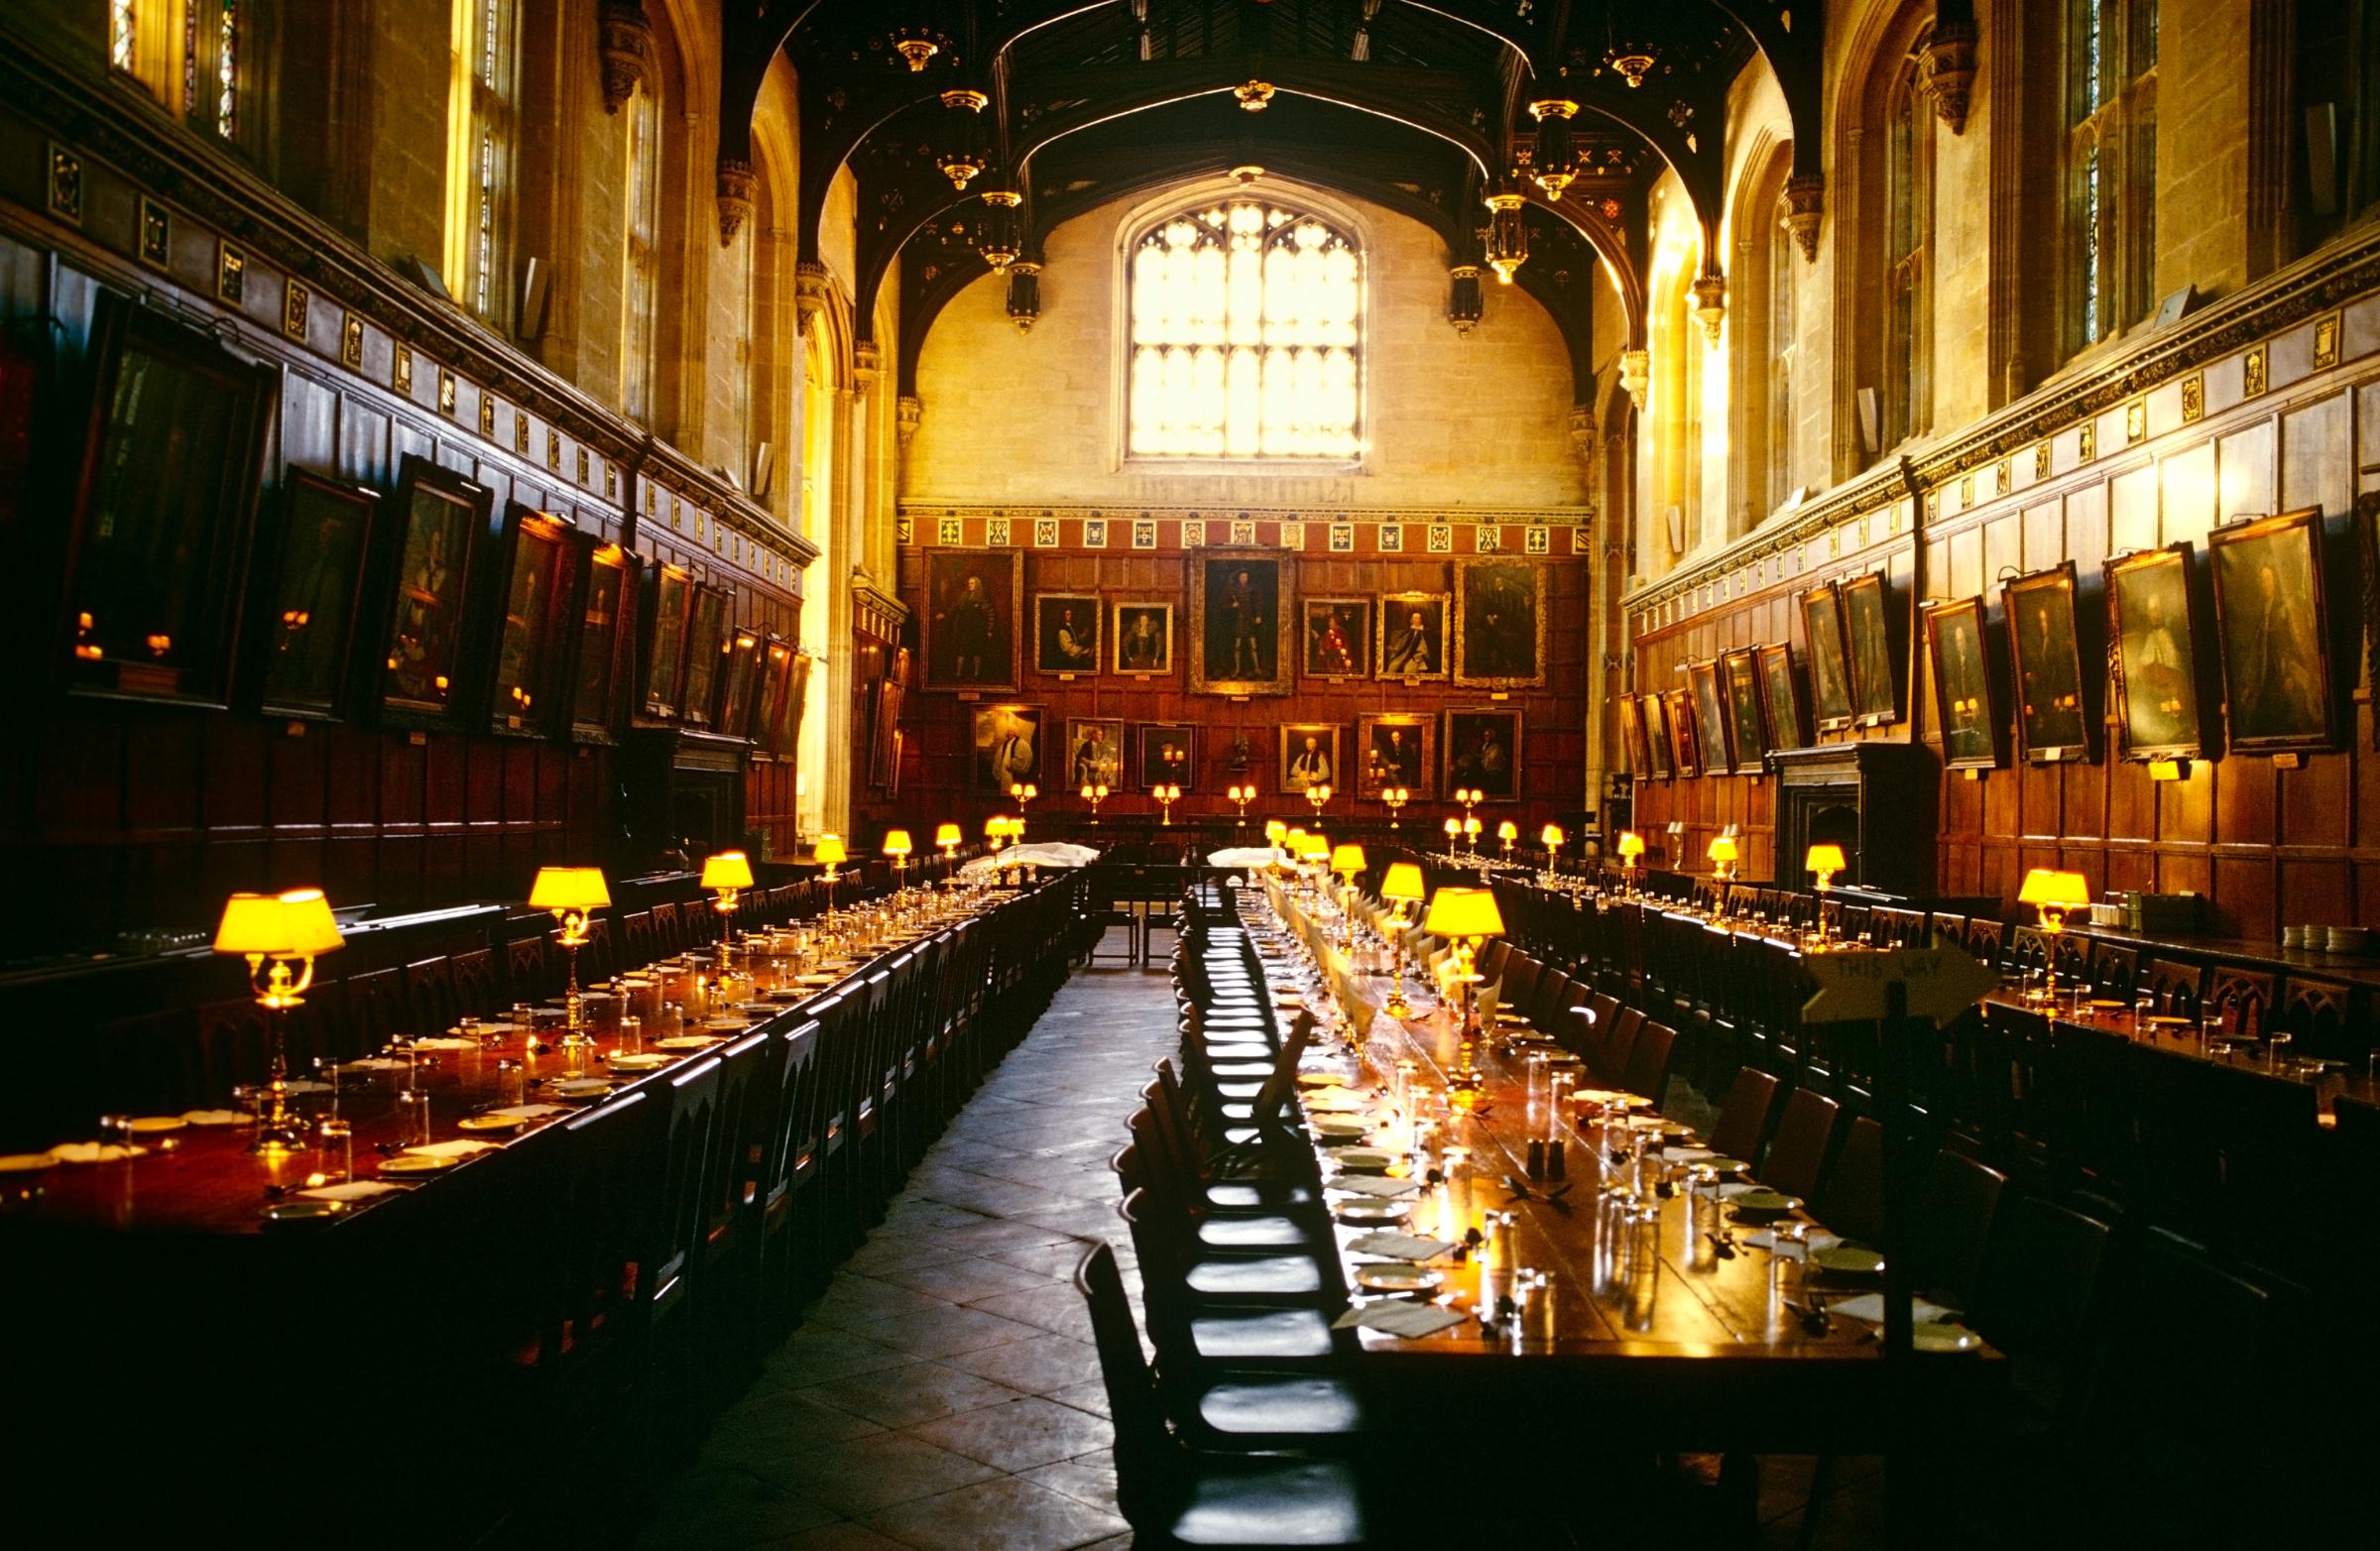 The Grand Hall, Christ Church, Oxford University in Oxford, U.K. When it comes to 'Harry Potter,' few sights are as iconic as Hogwarts's Great Hall. In the film, young witches and wizards from each house gather around long tables for meals and ceremonial events – much like the students at Christ Church, a college at Oxford University. Visitors can get a peek at the real thing during a visit to the college – if there isn't an educational event going on, of course.